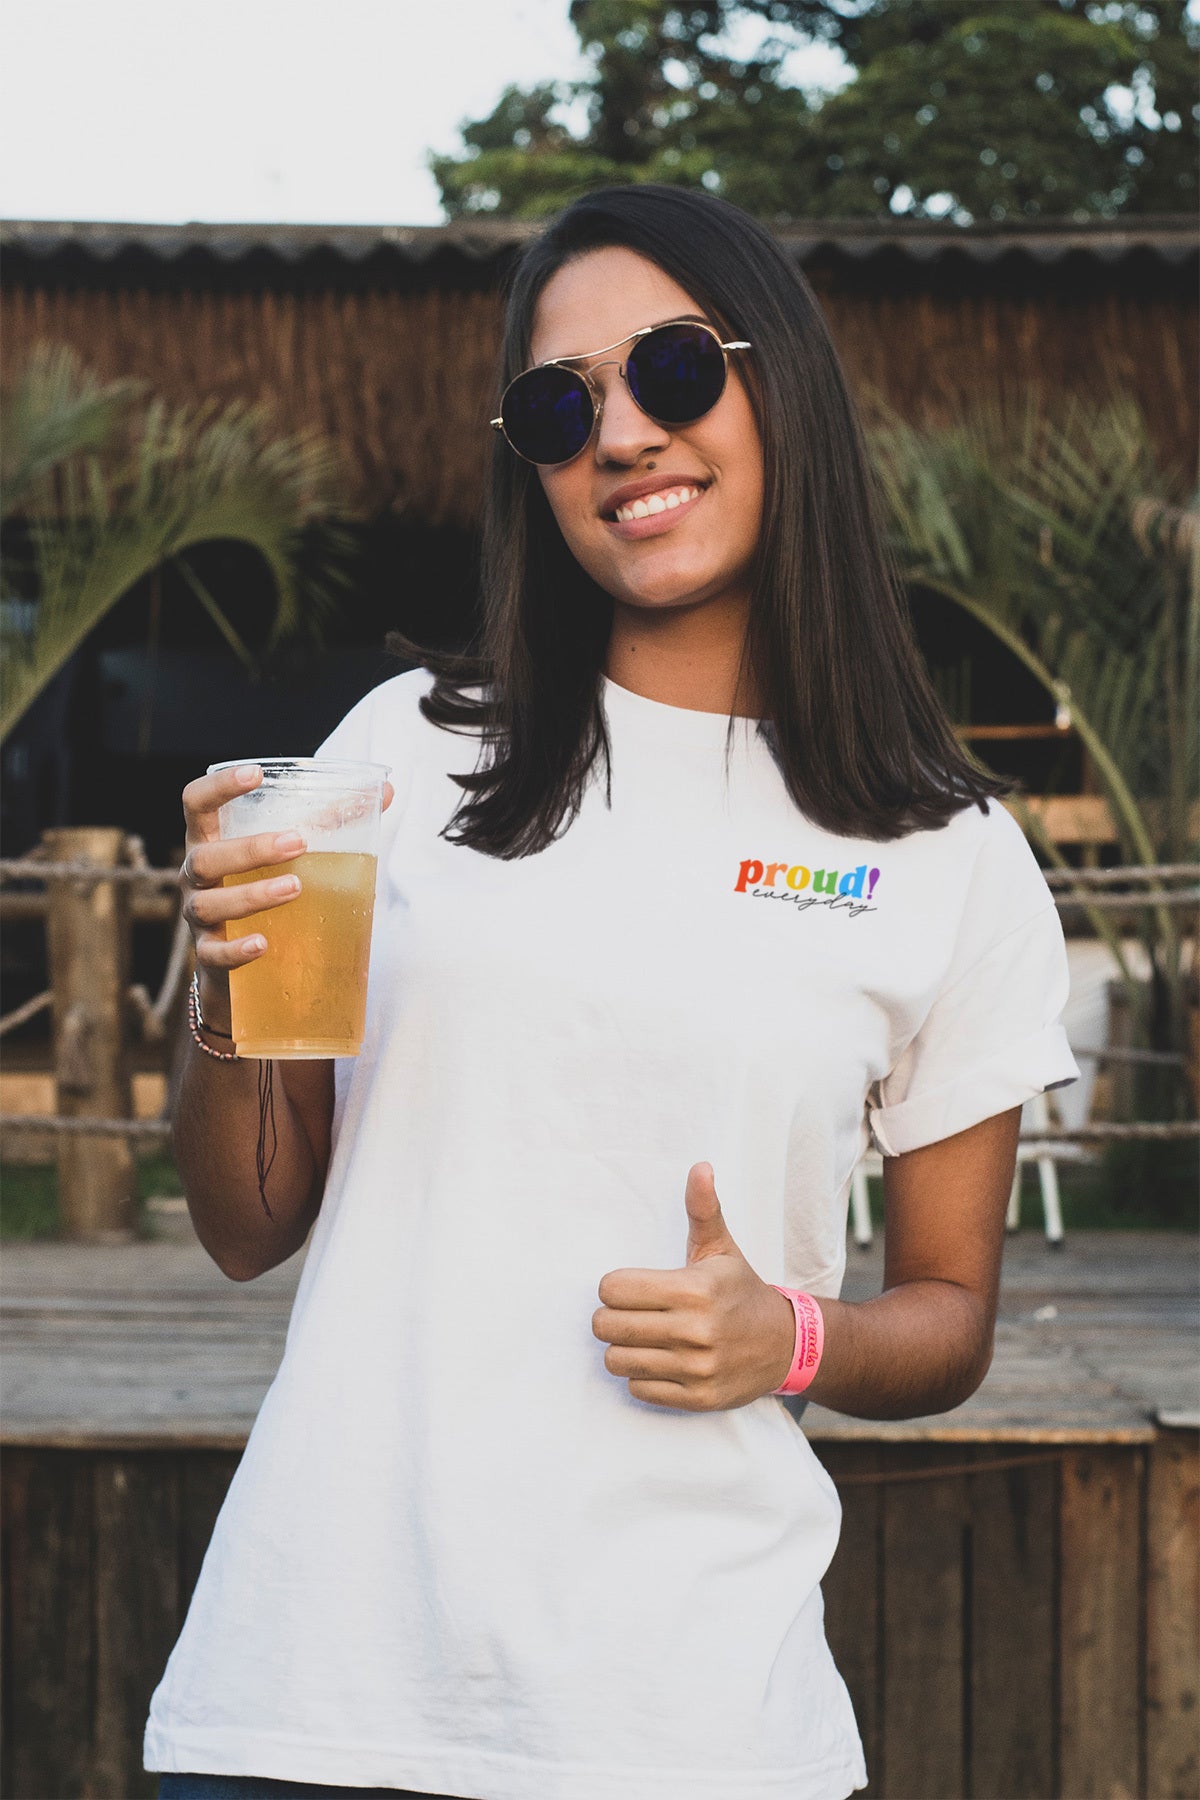 Proud Everyday" Pride T-Shirt: Show your ongoing pride and support for the LGBTQ+ community with this vibrant and empowering tee, perfect for expressing your identity and celebrating diversity every day of the year